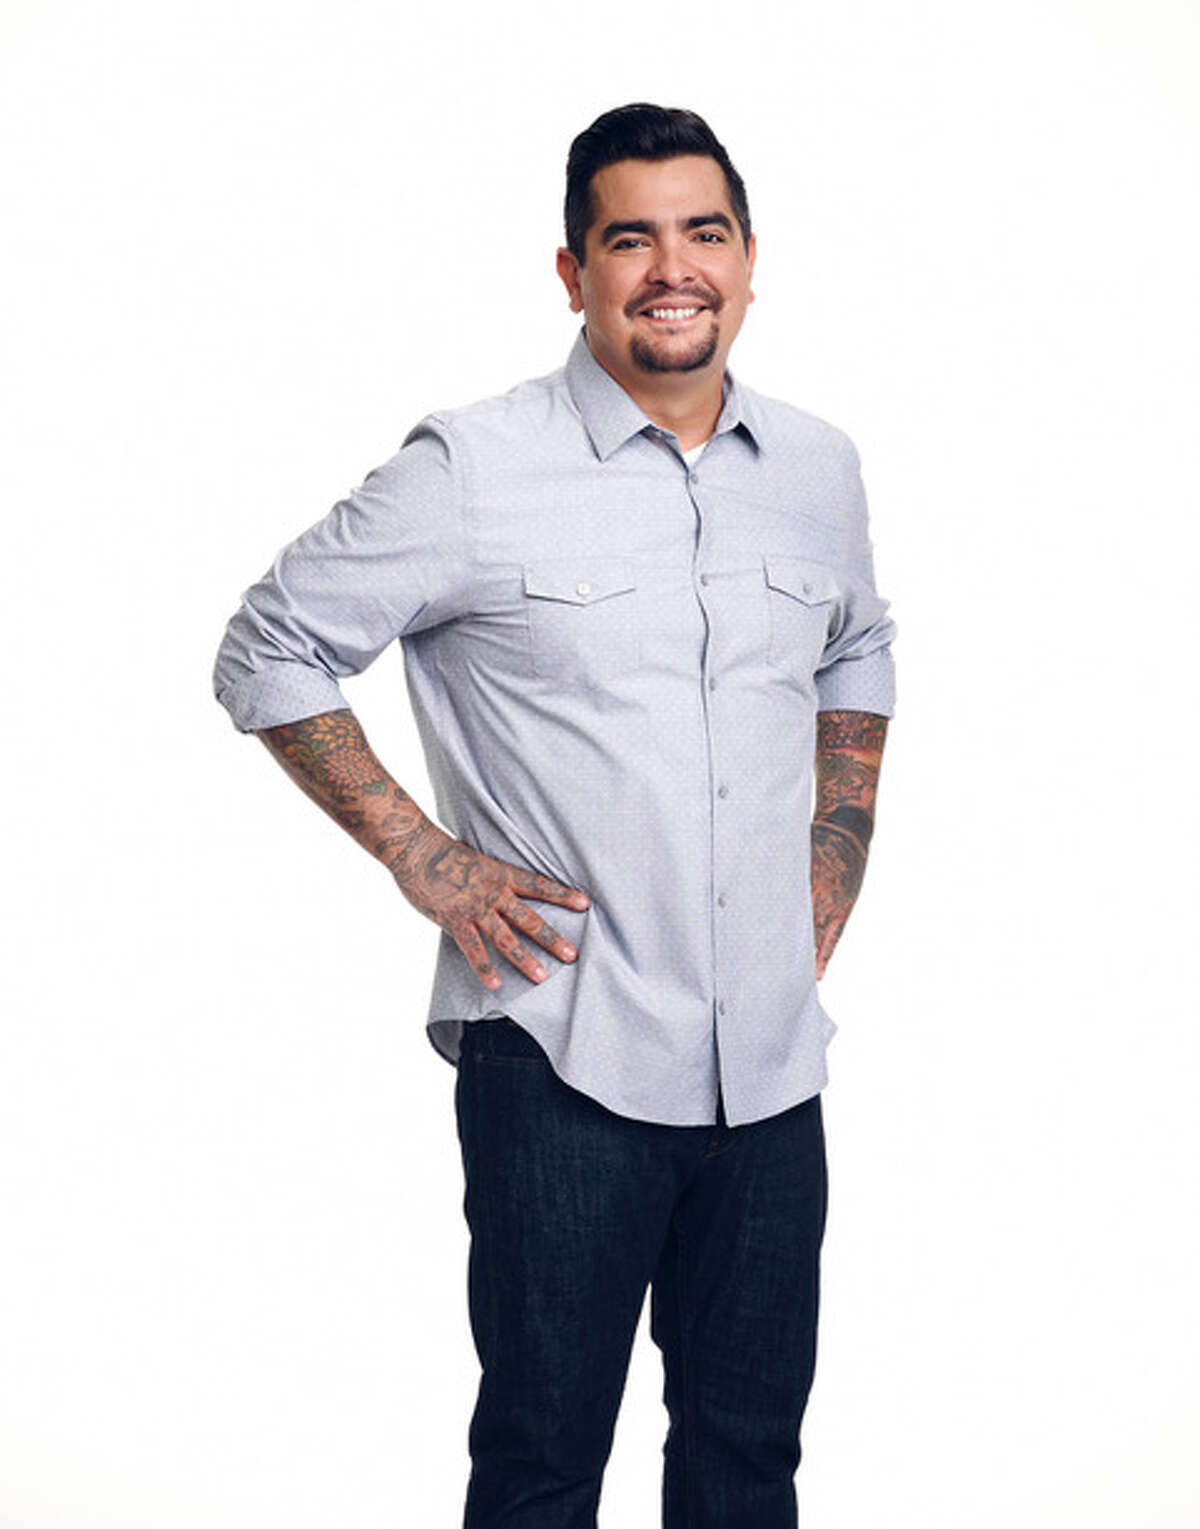 Chef and restaurateur Aaron Sanchez comes to Houston Dec. 5 for his book tour promoting "Where I Come From."